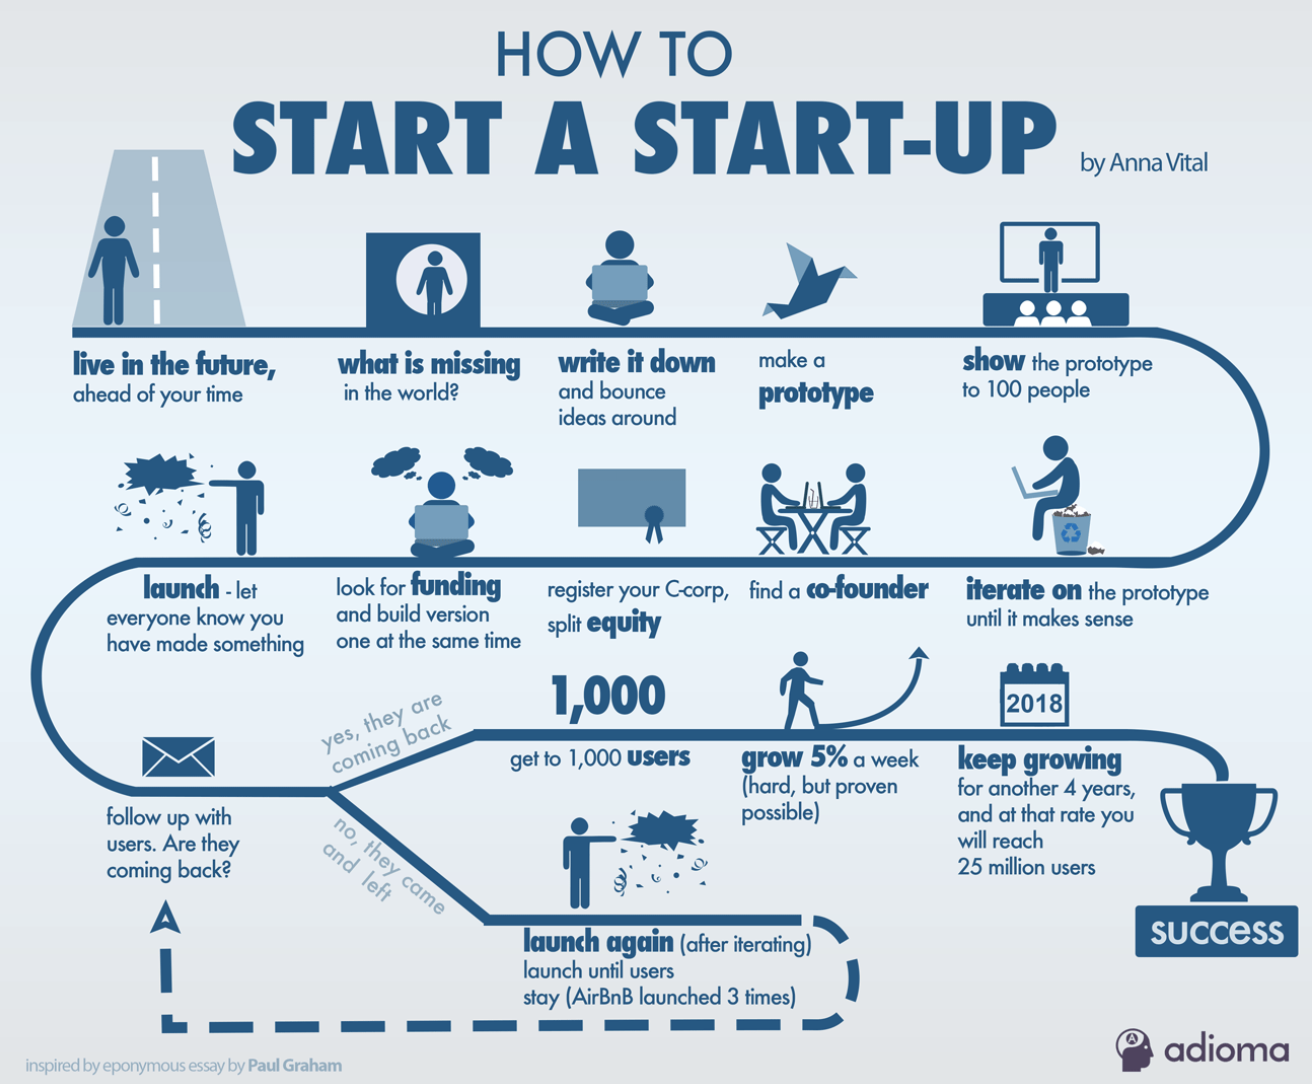 launching your startup